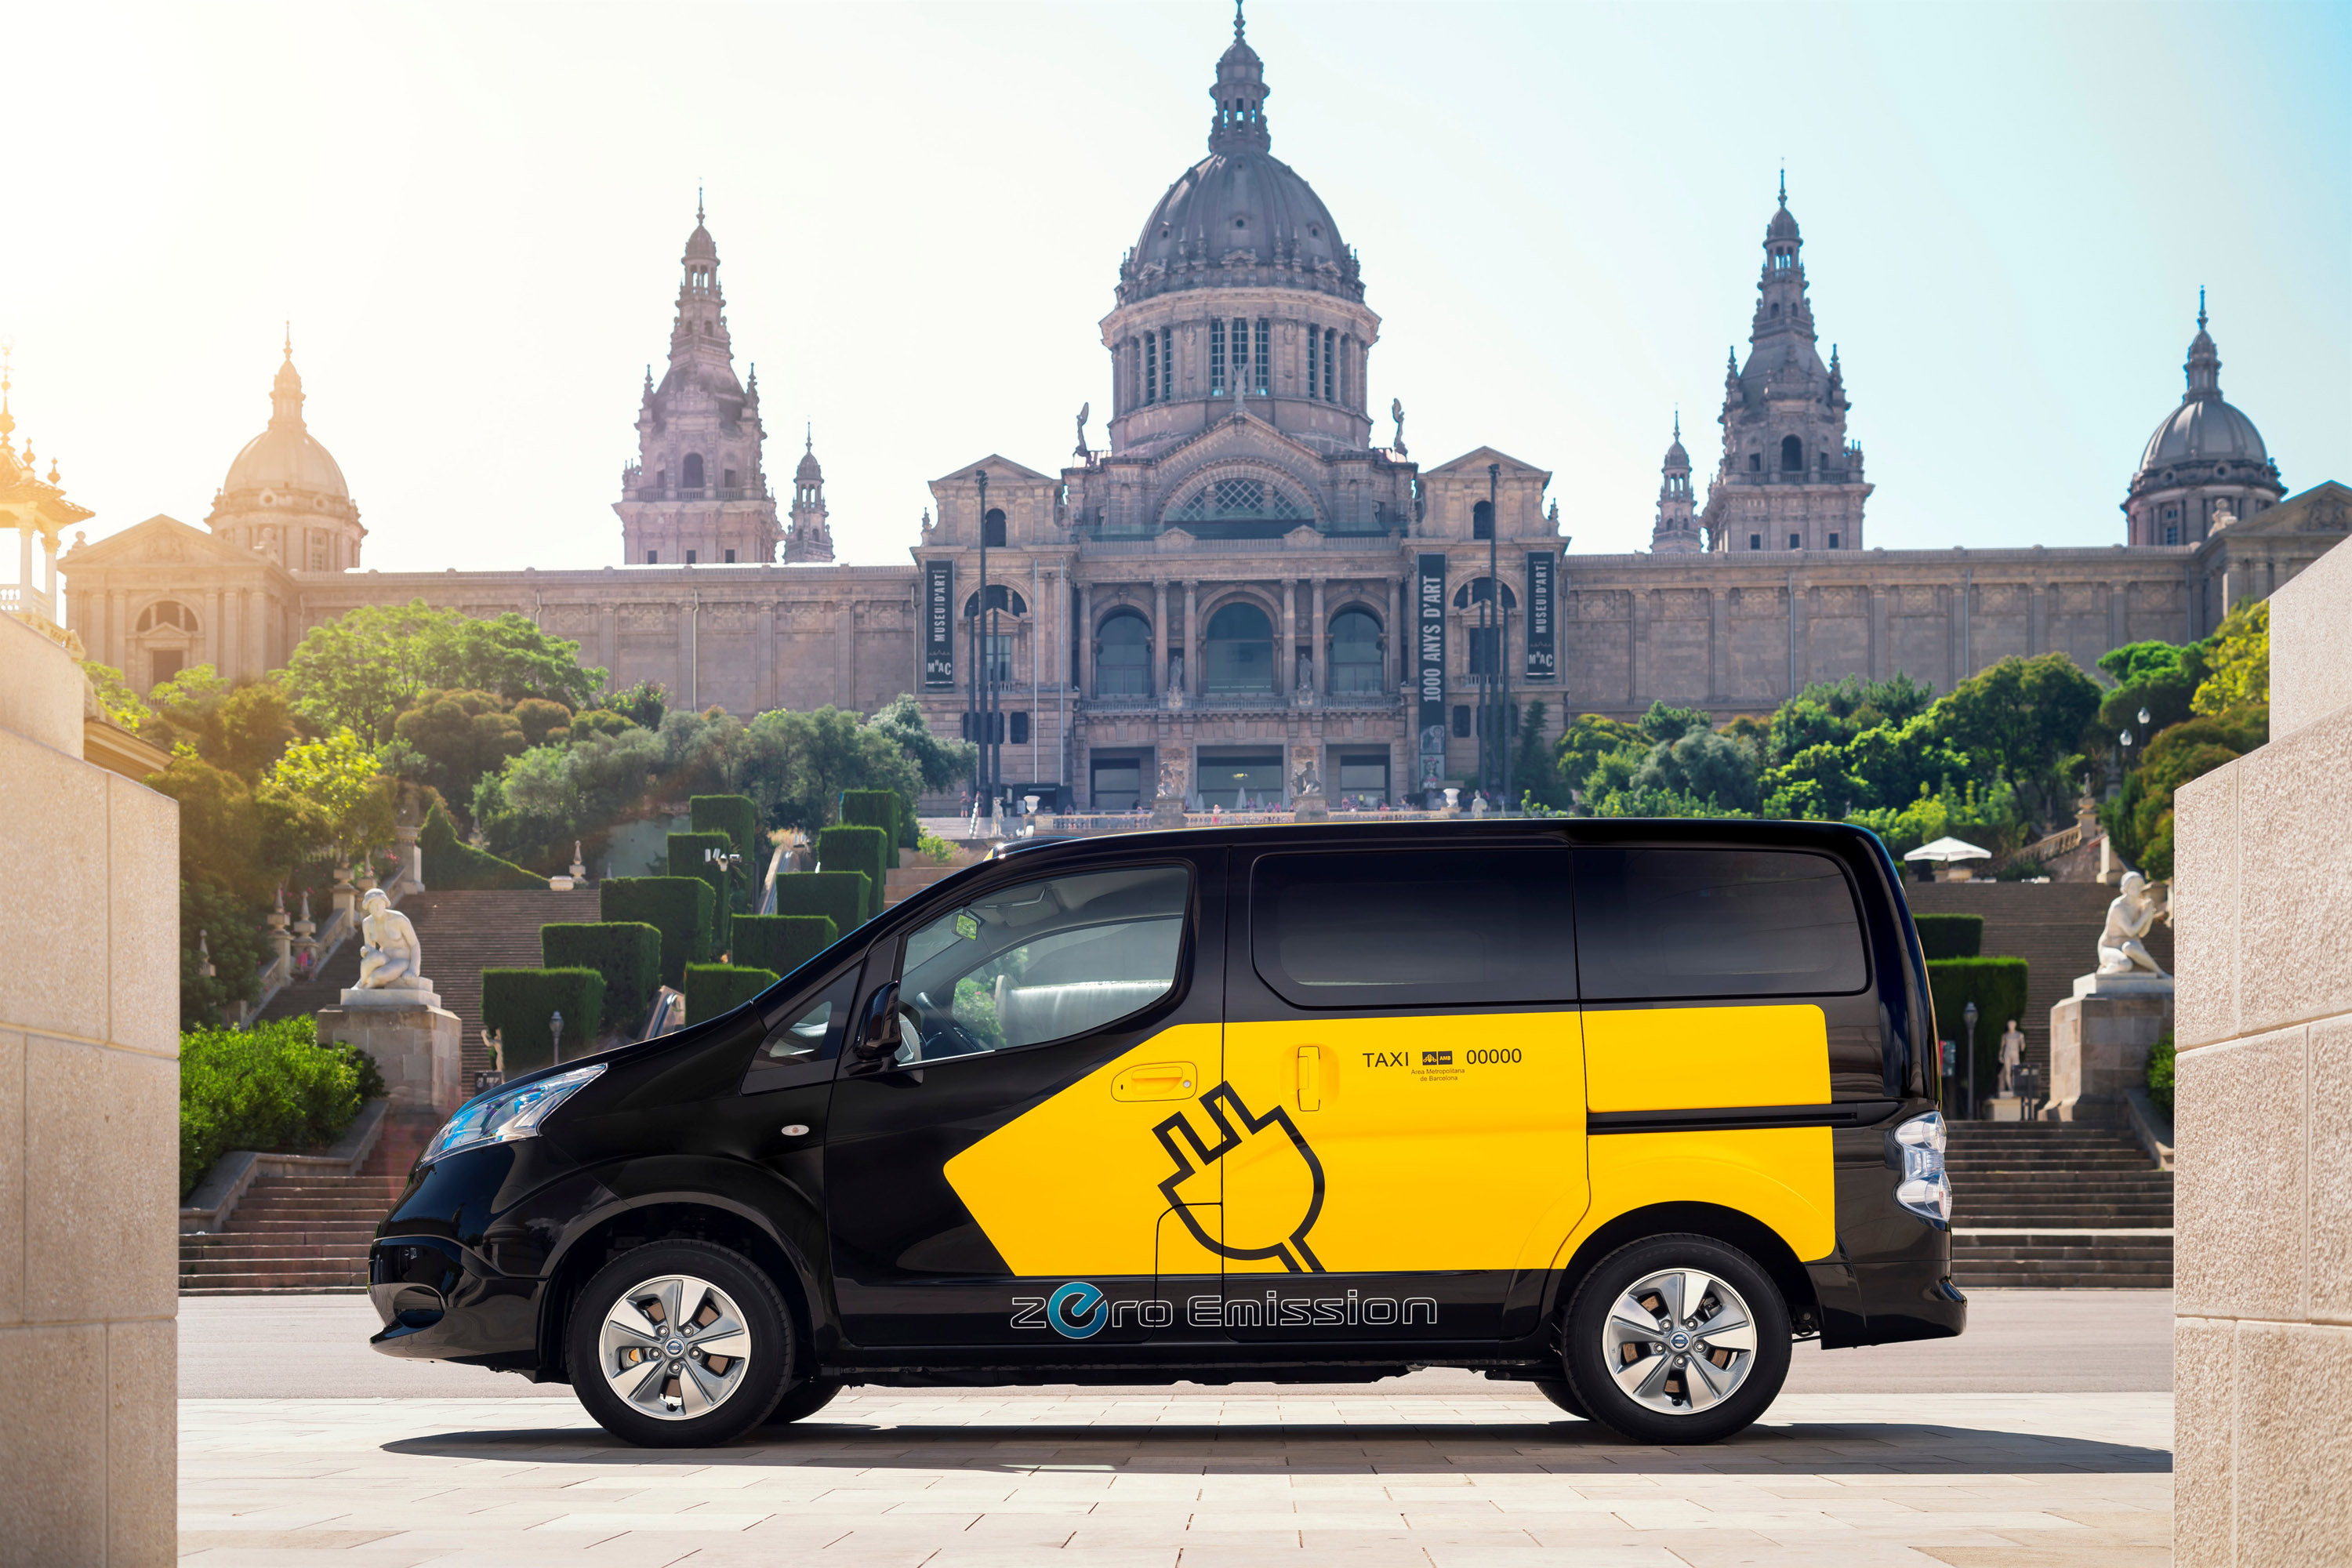 Nissan Electric Taxi photo #3